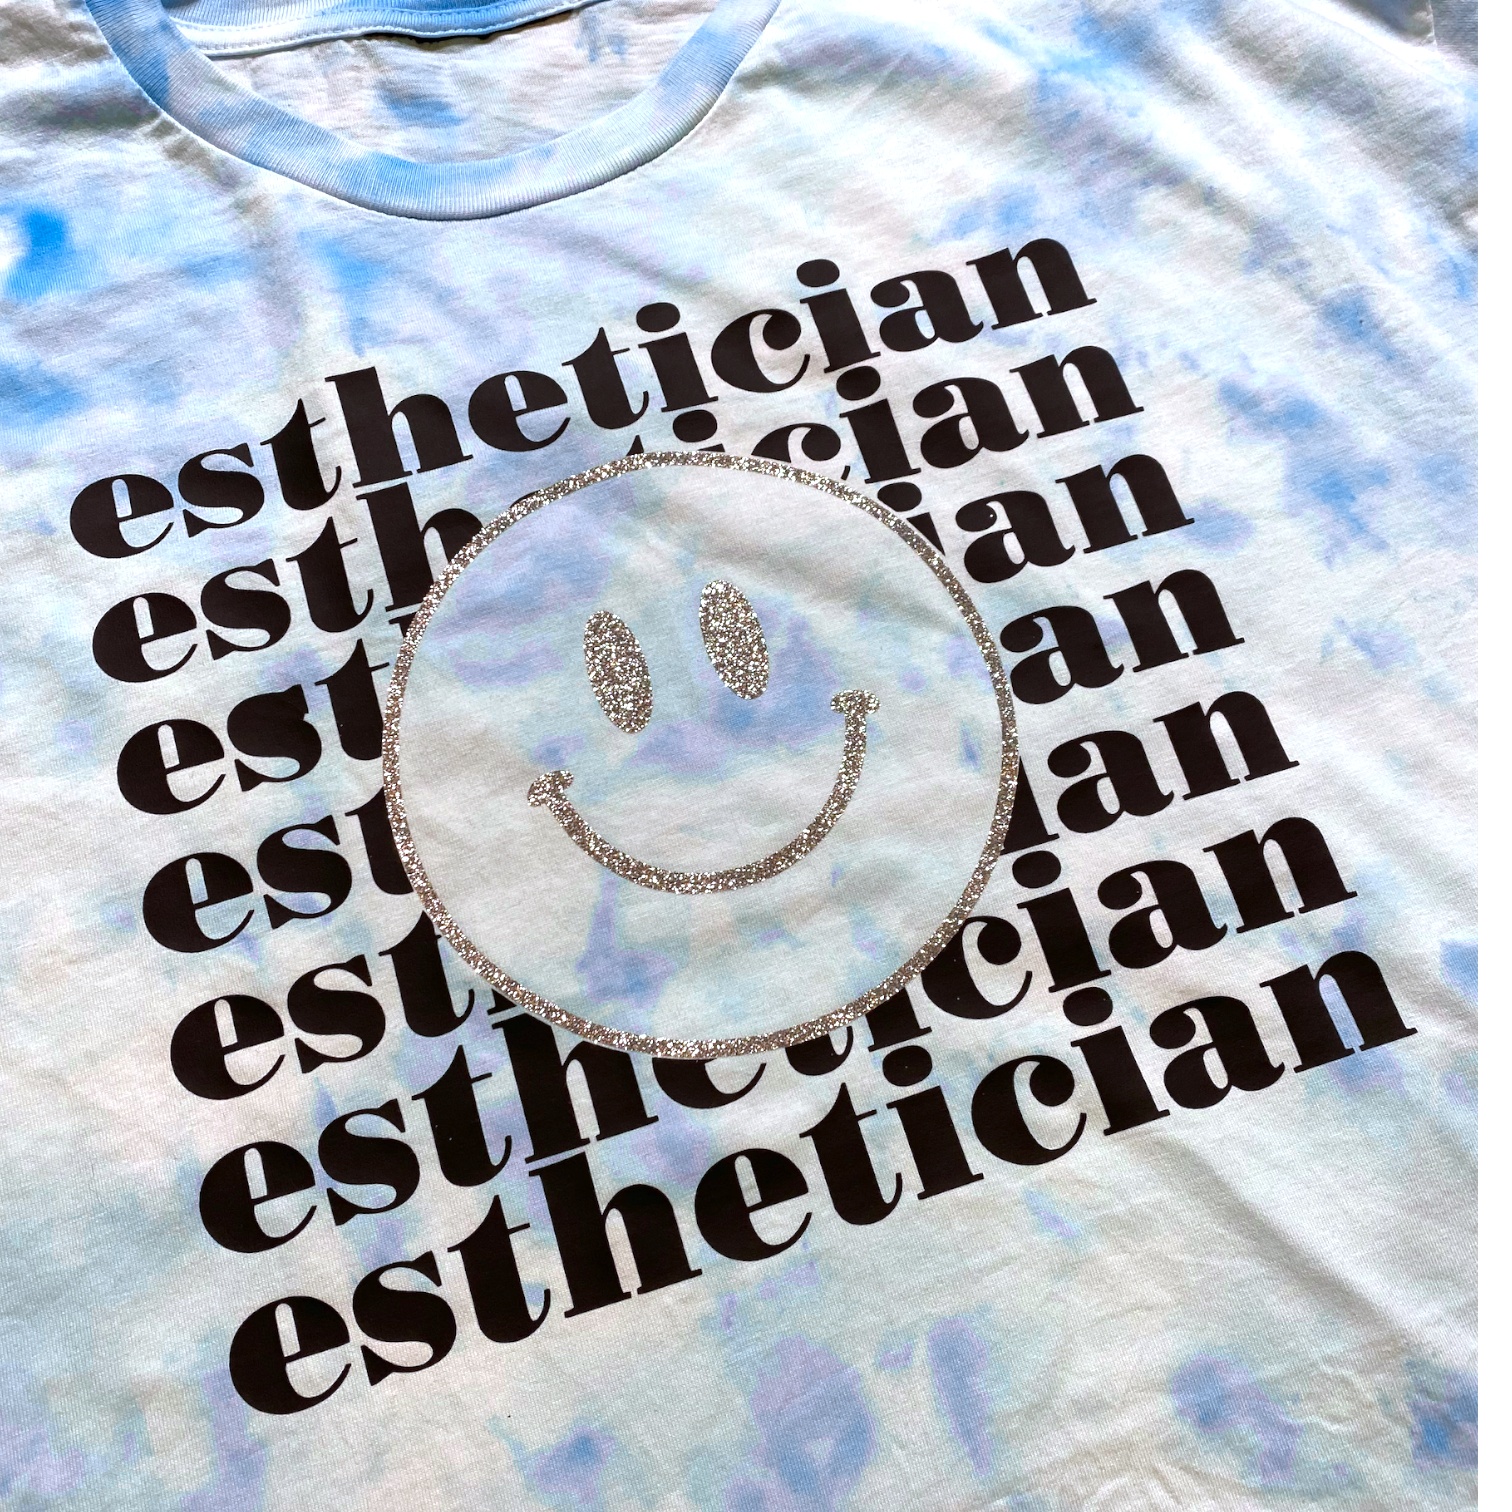 T-SHIRT - ESTHETICIAN ( tie dye, relaxed fit, vinyl print with glitter )